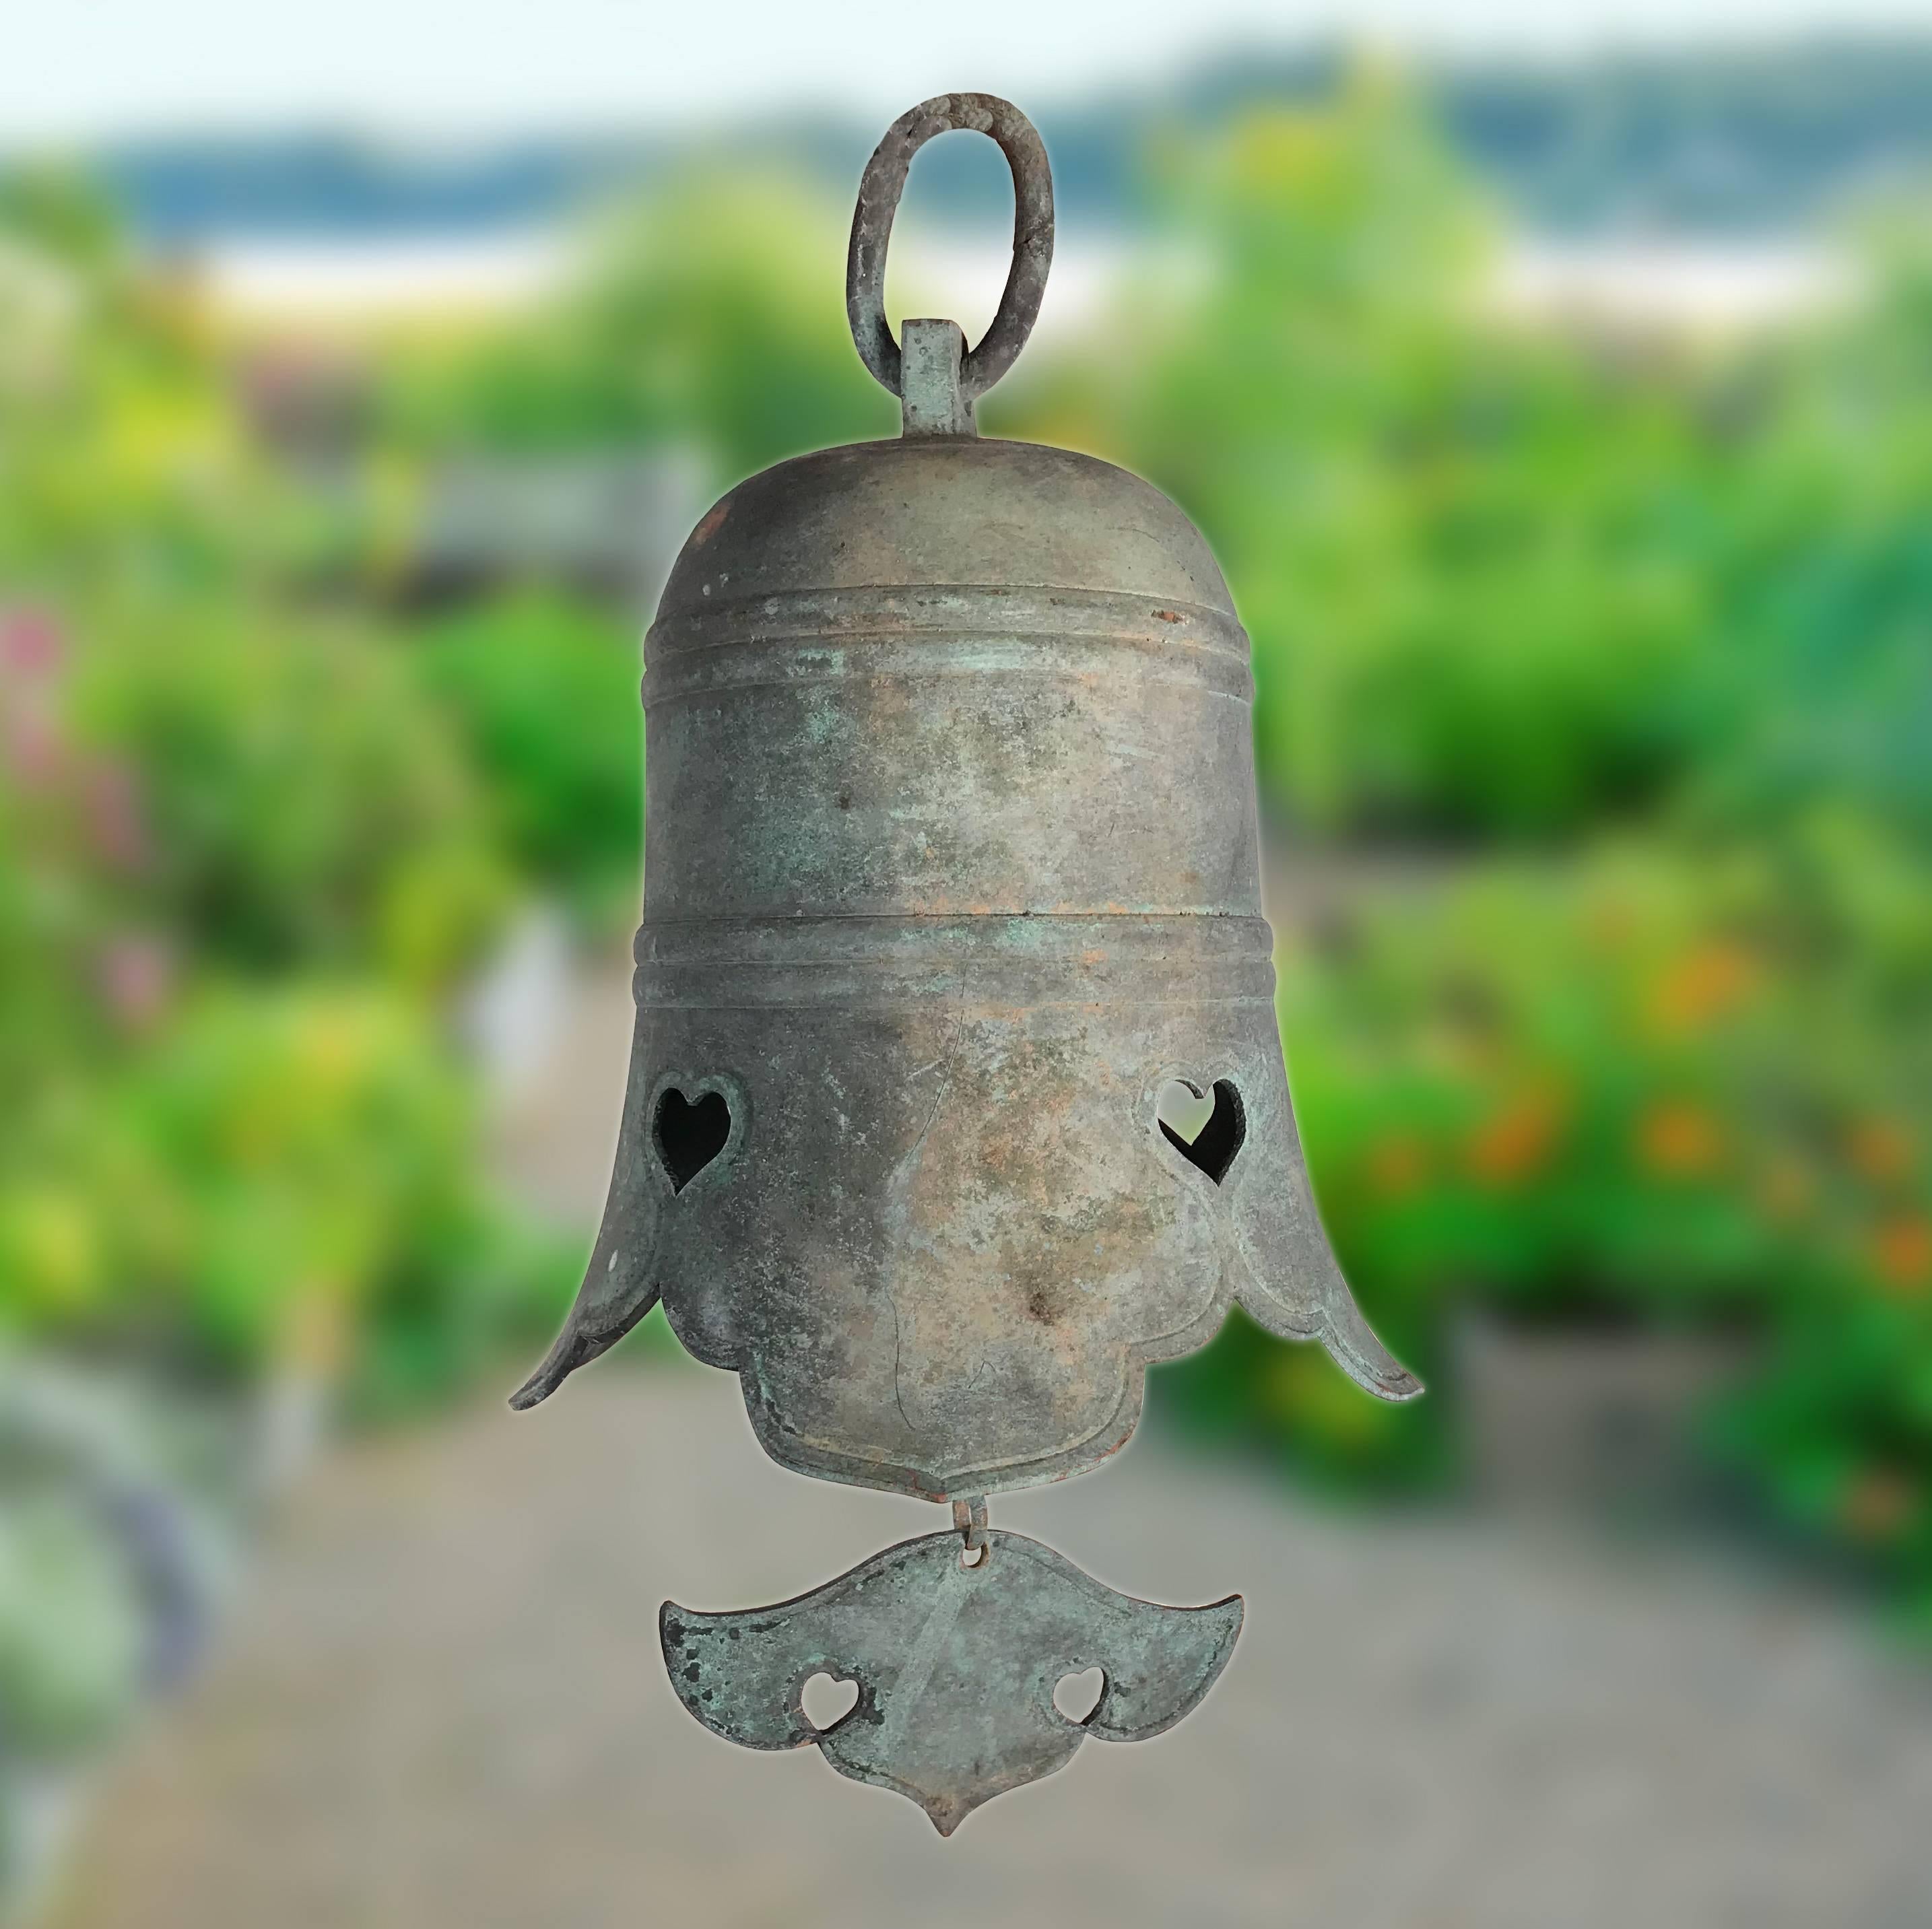 Here's a rare treasure from Japan and an unusual find- an excellent candidate to accent your indoor or outdoor garden space. 

This is a superb antique bronze casting of a wonderful medium to large-scale temple bell complete with its original cloud